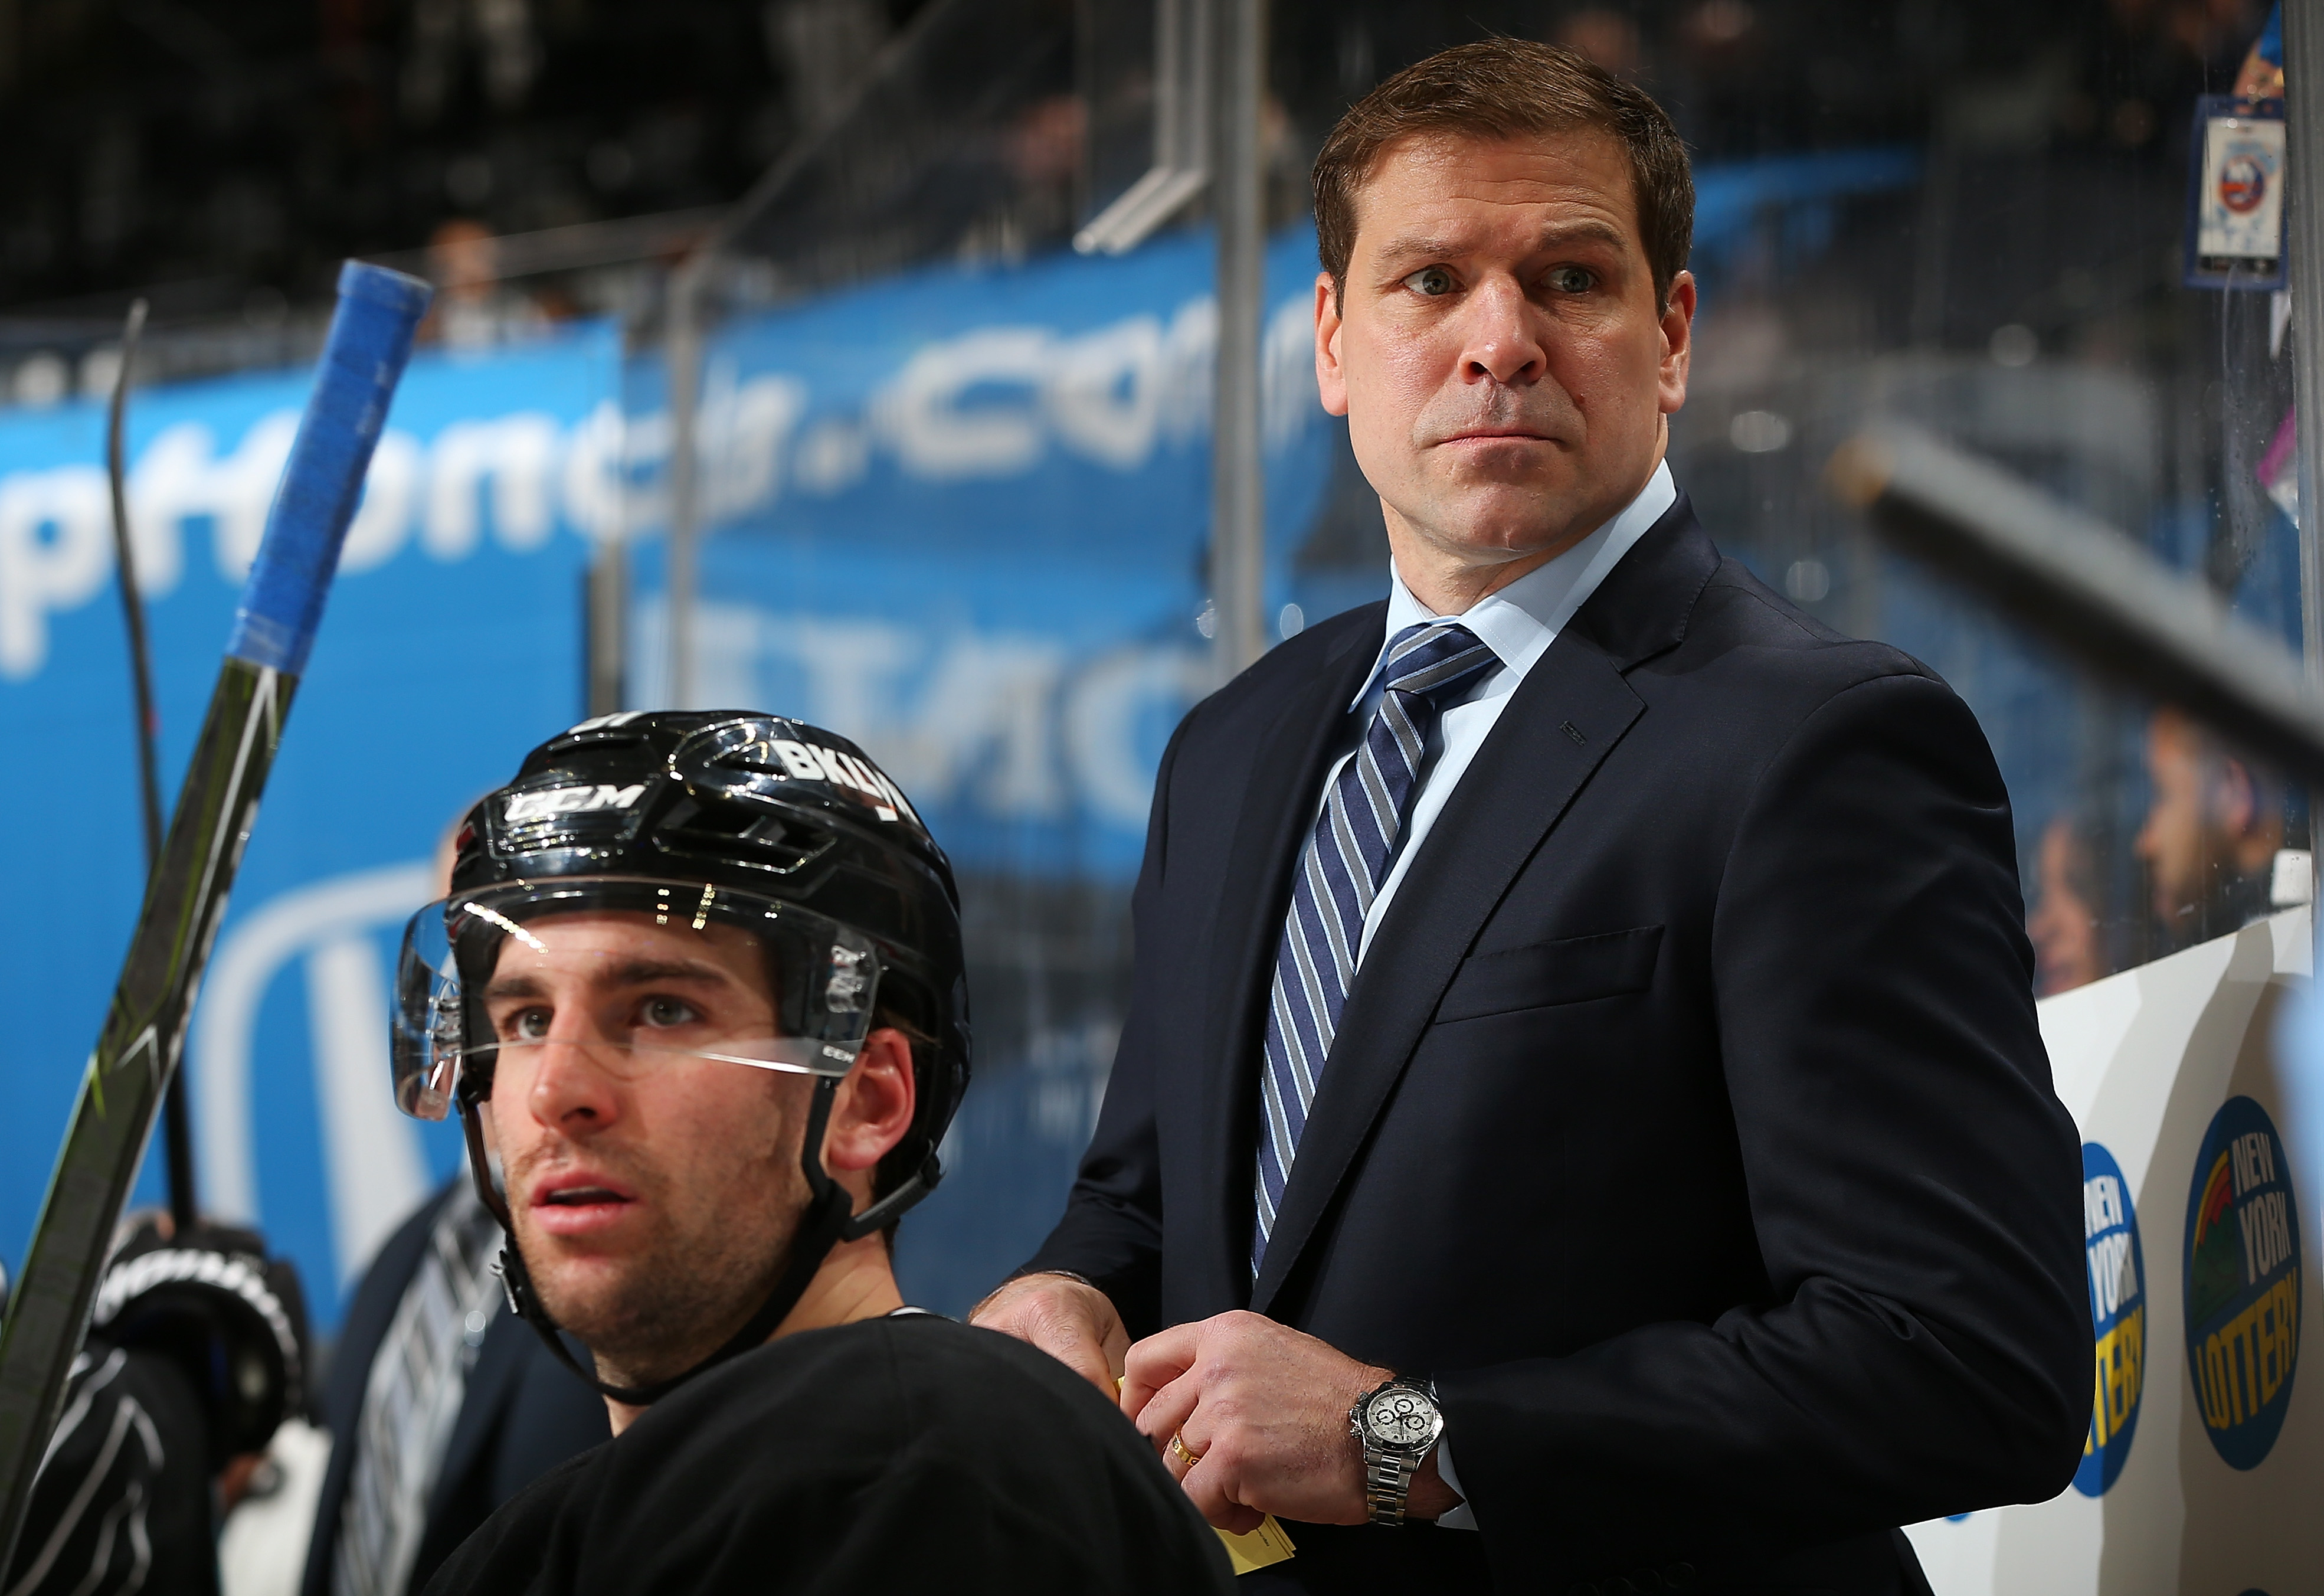 NEW YORK, NY - JANUARY 19: Doug Weight of the New York Islanders looks on from the bench during his first game as head coach against the Dallas Stars as John Tavares #91 waits to enter the game at the Barclays Center on January 19, 2017 in Brooklyn borough of New York City. (Photo by Mike Stobe/NHLI via Getty Images)